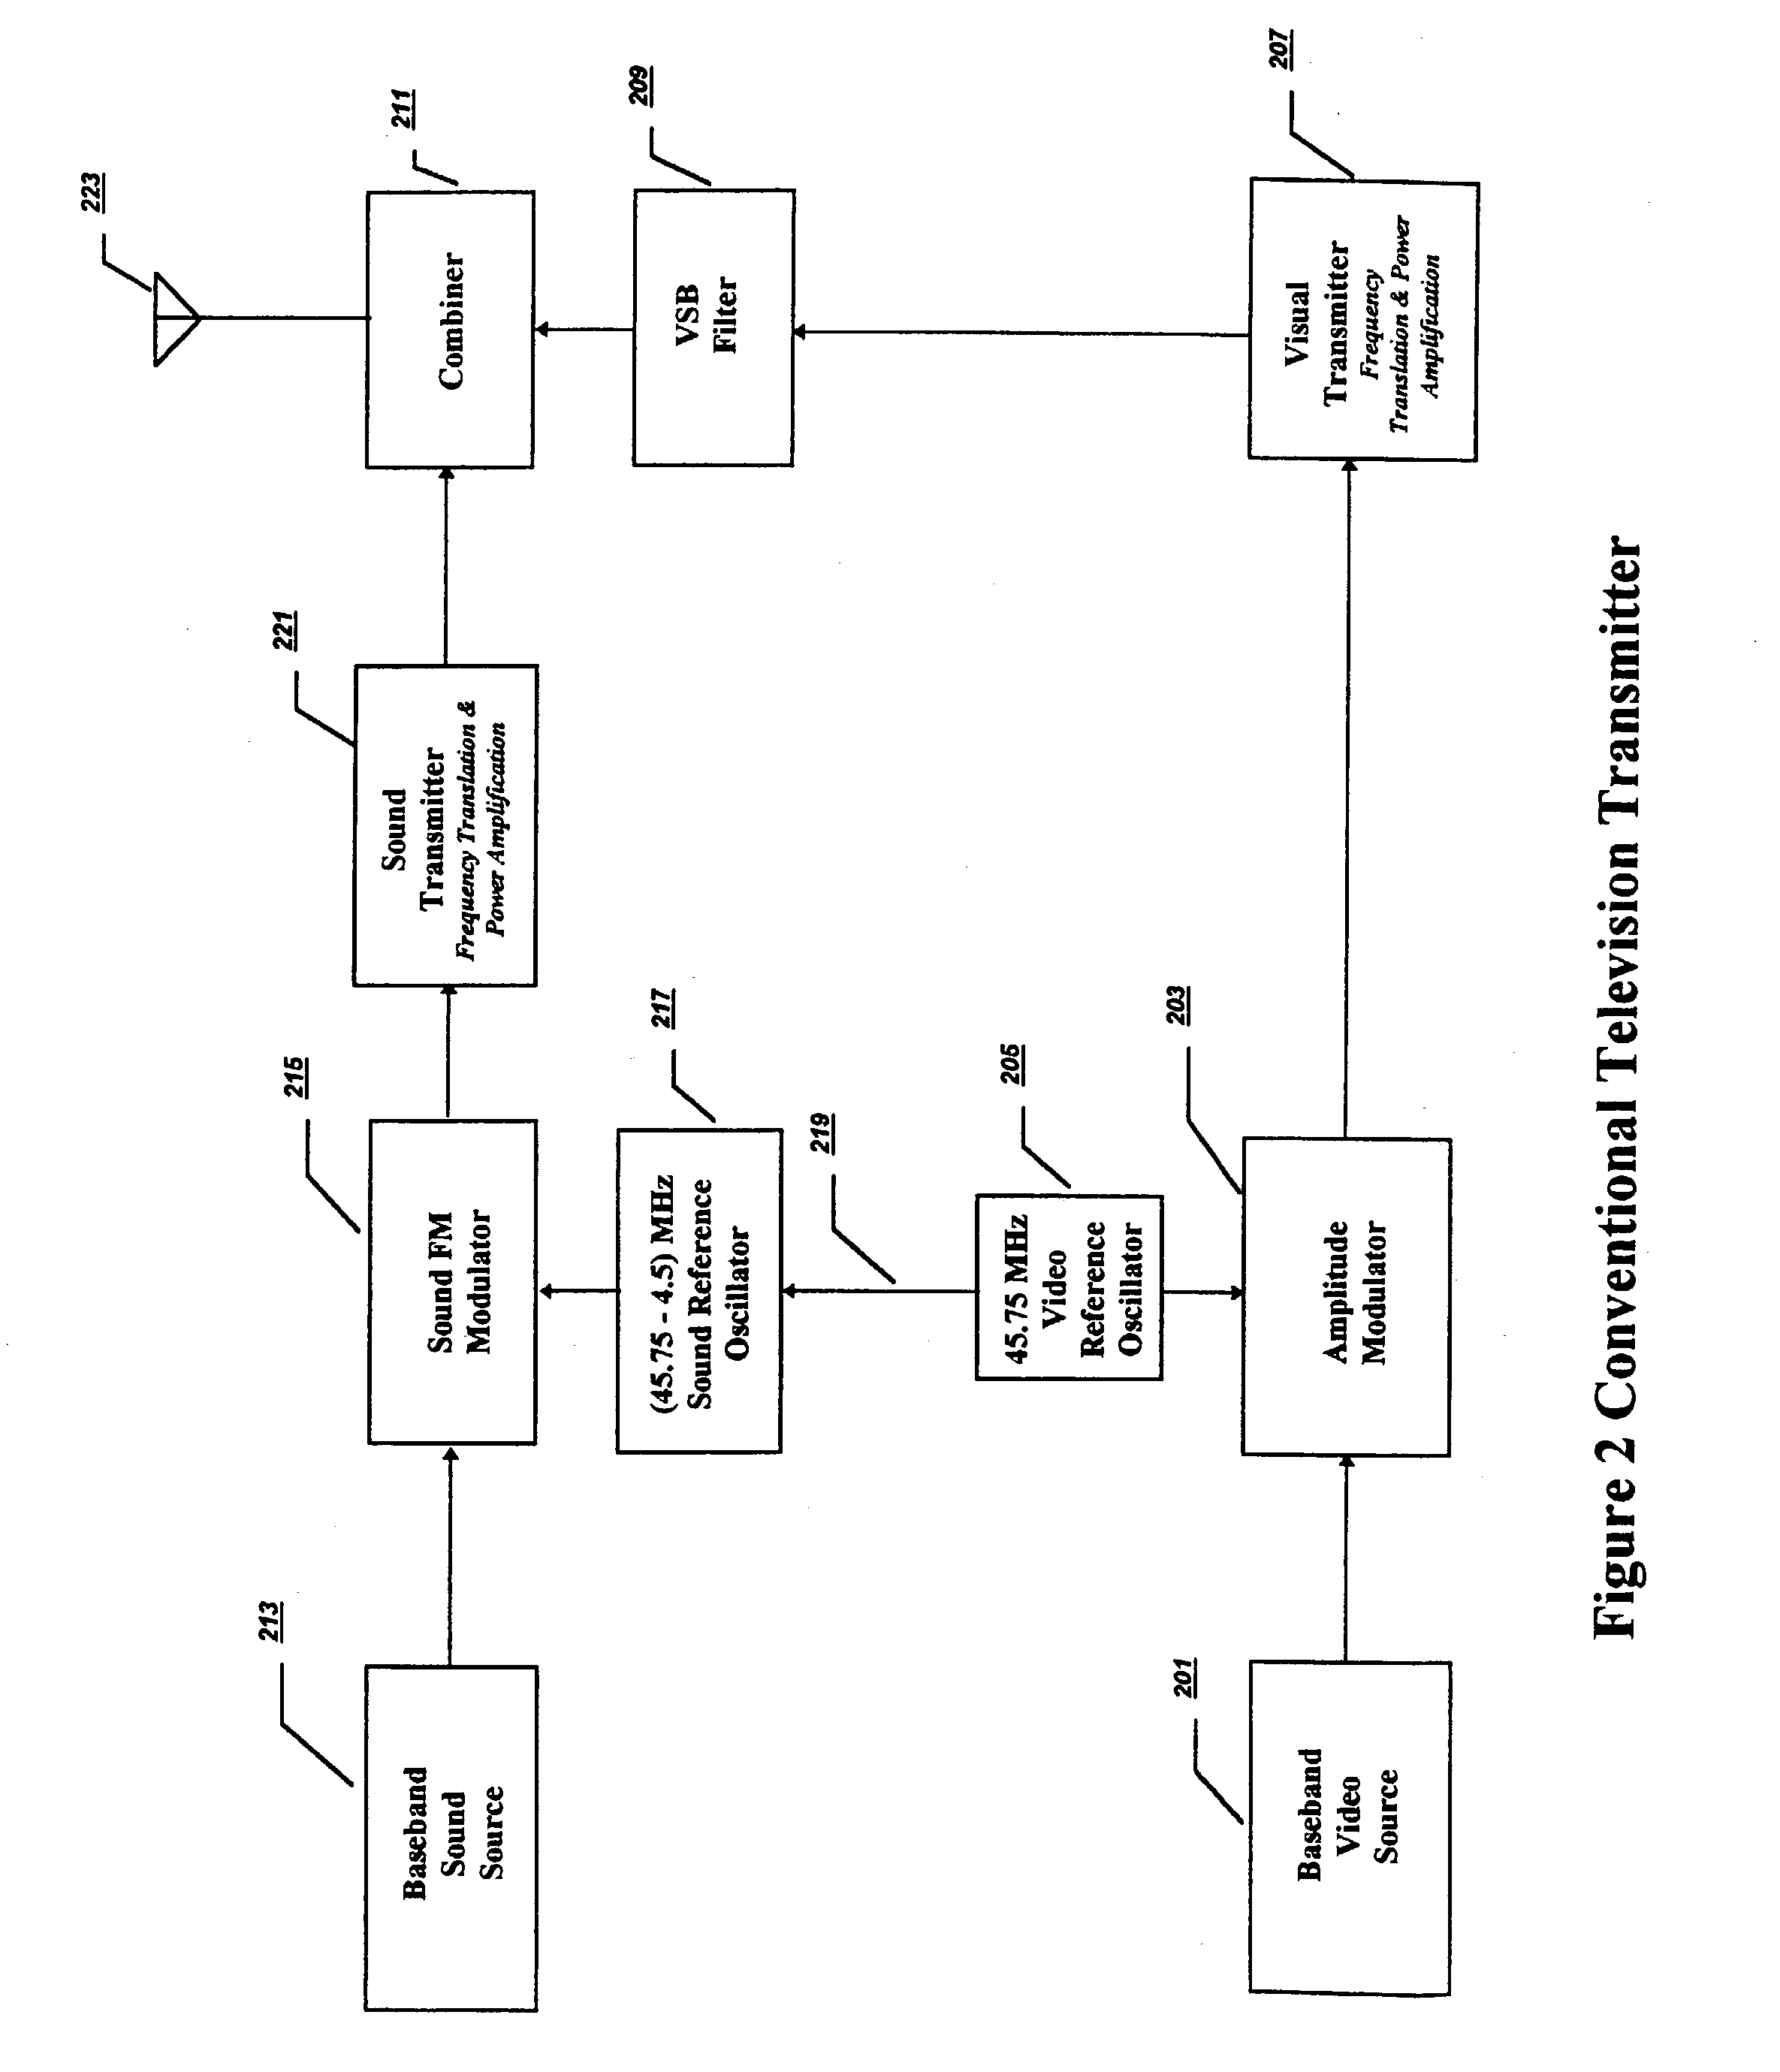 Expanded information capacity for existing communication transmission systems